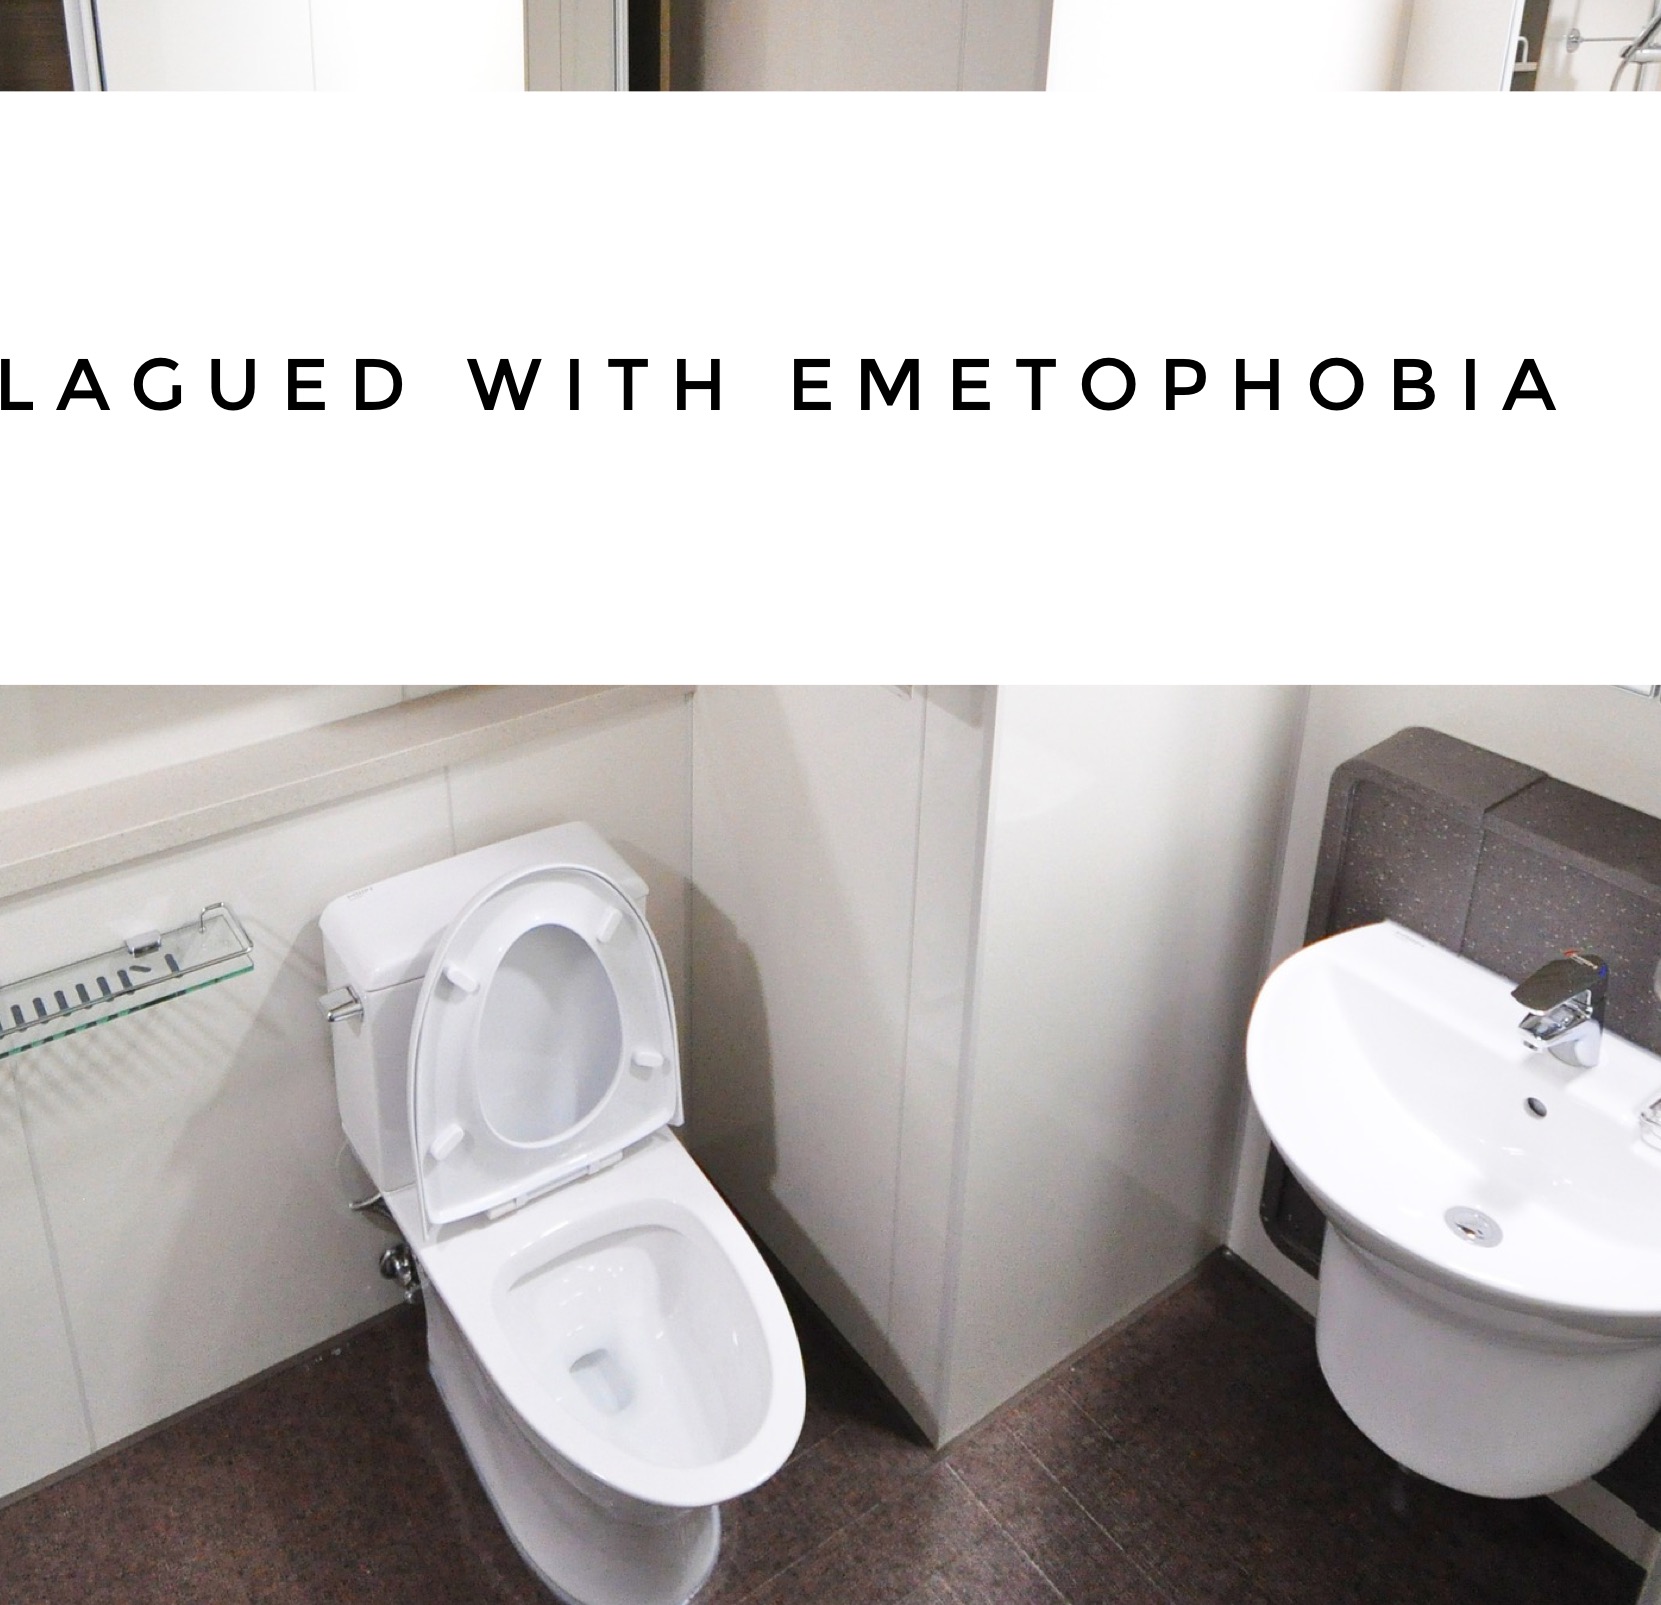 Plagued with Emetophobia